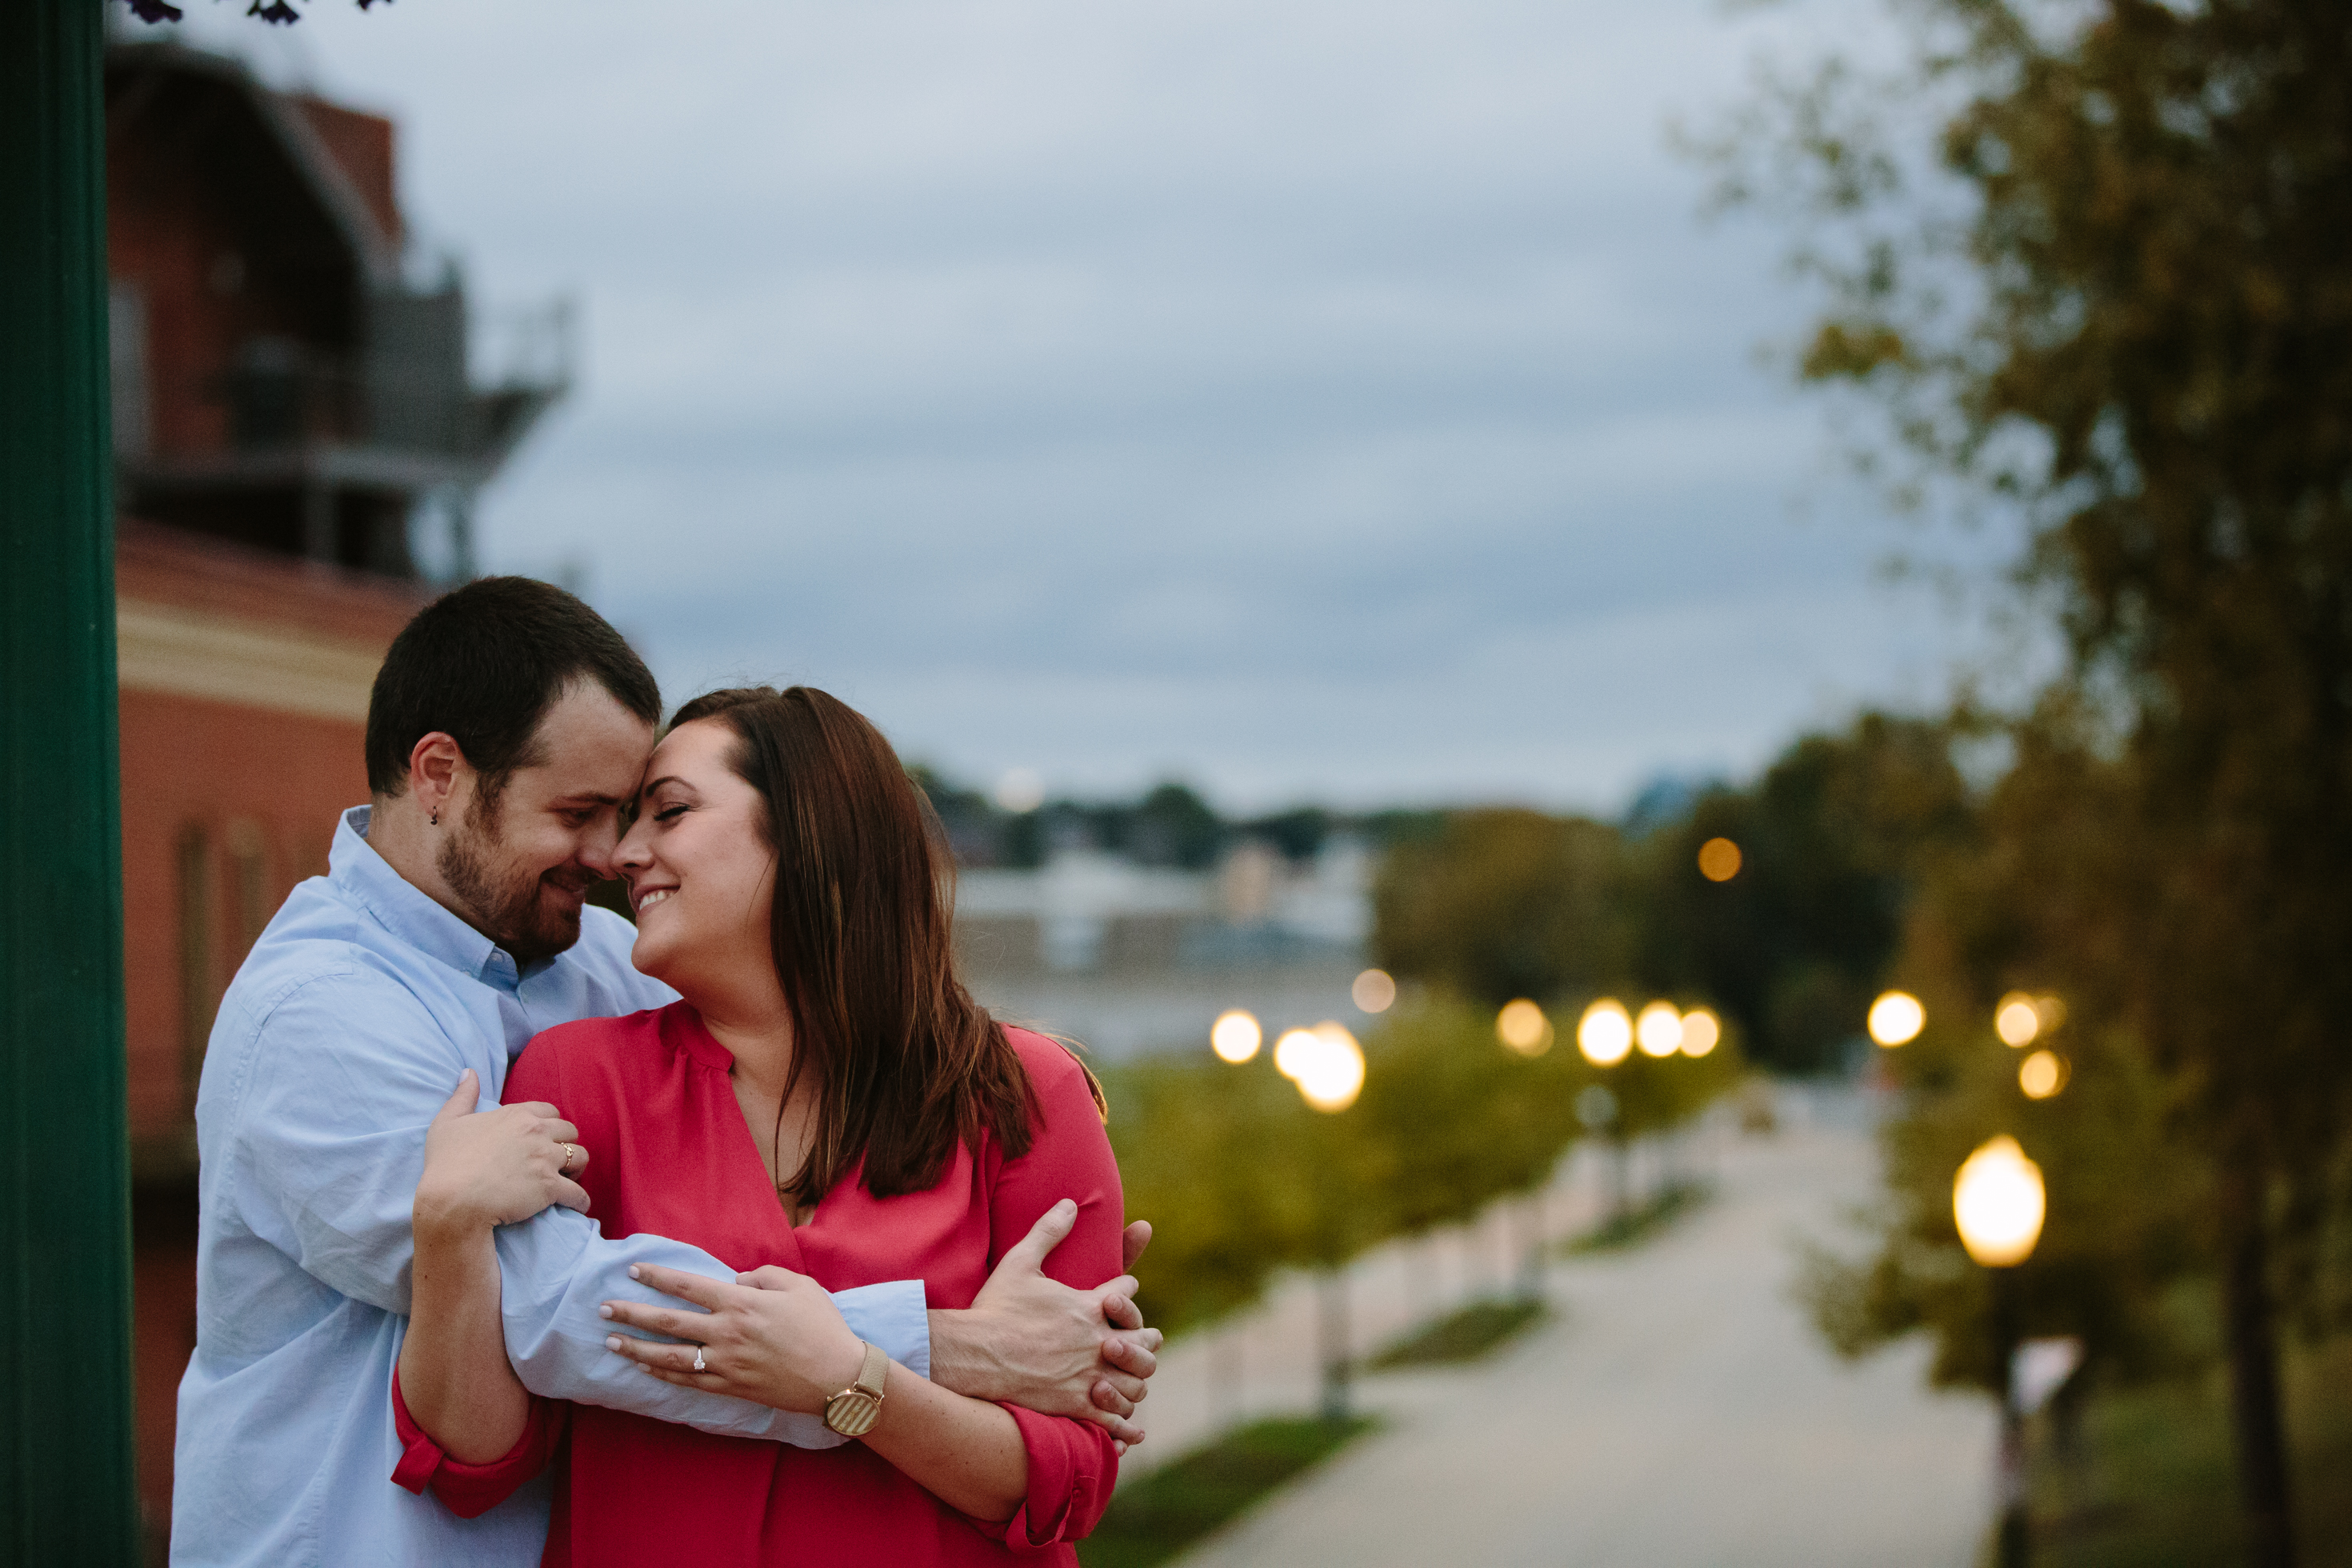 dubuque engagement session by catherine furlin photography, couple snuggling in Port of Dubuque on Mississippi River